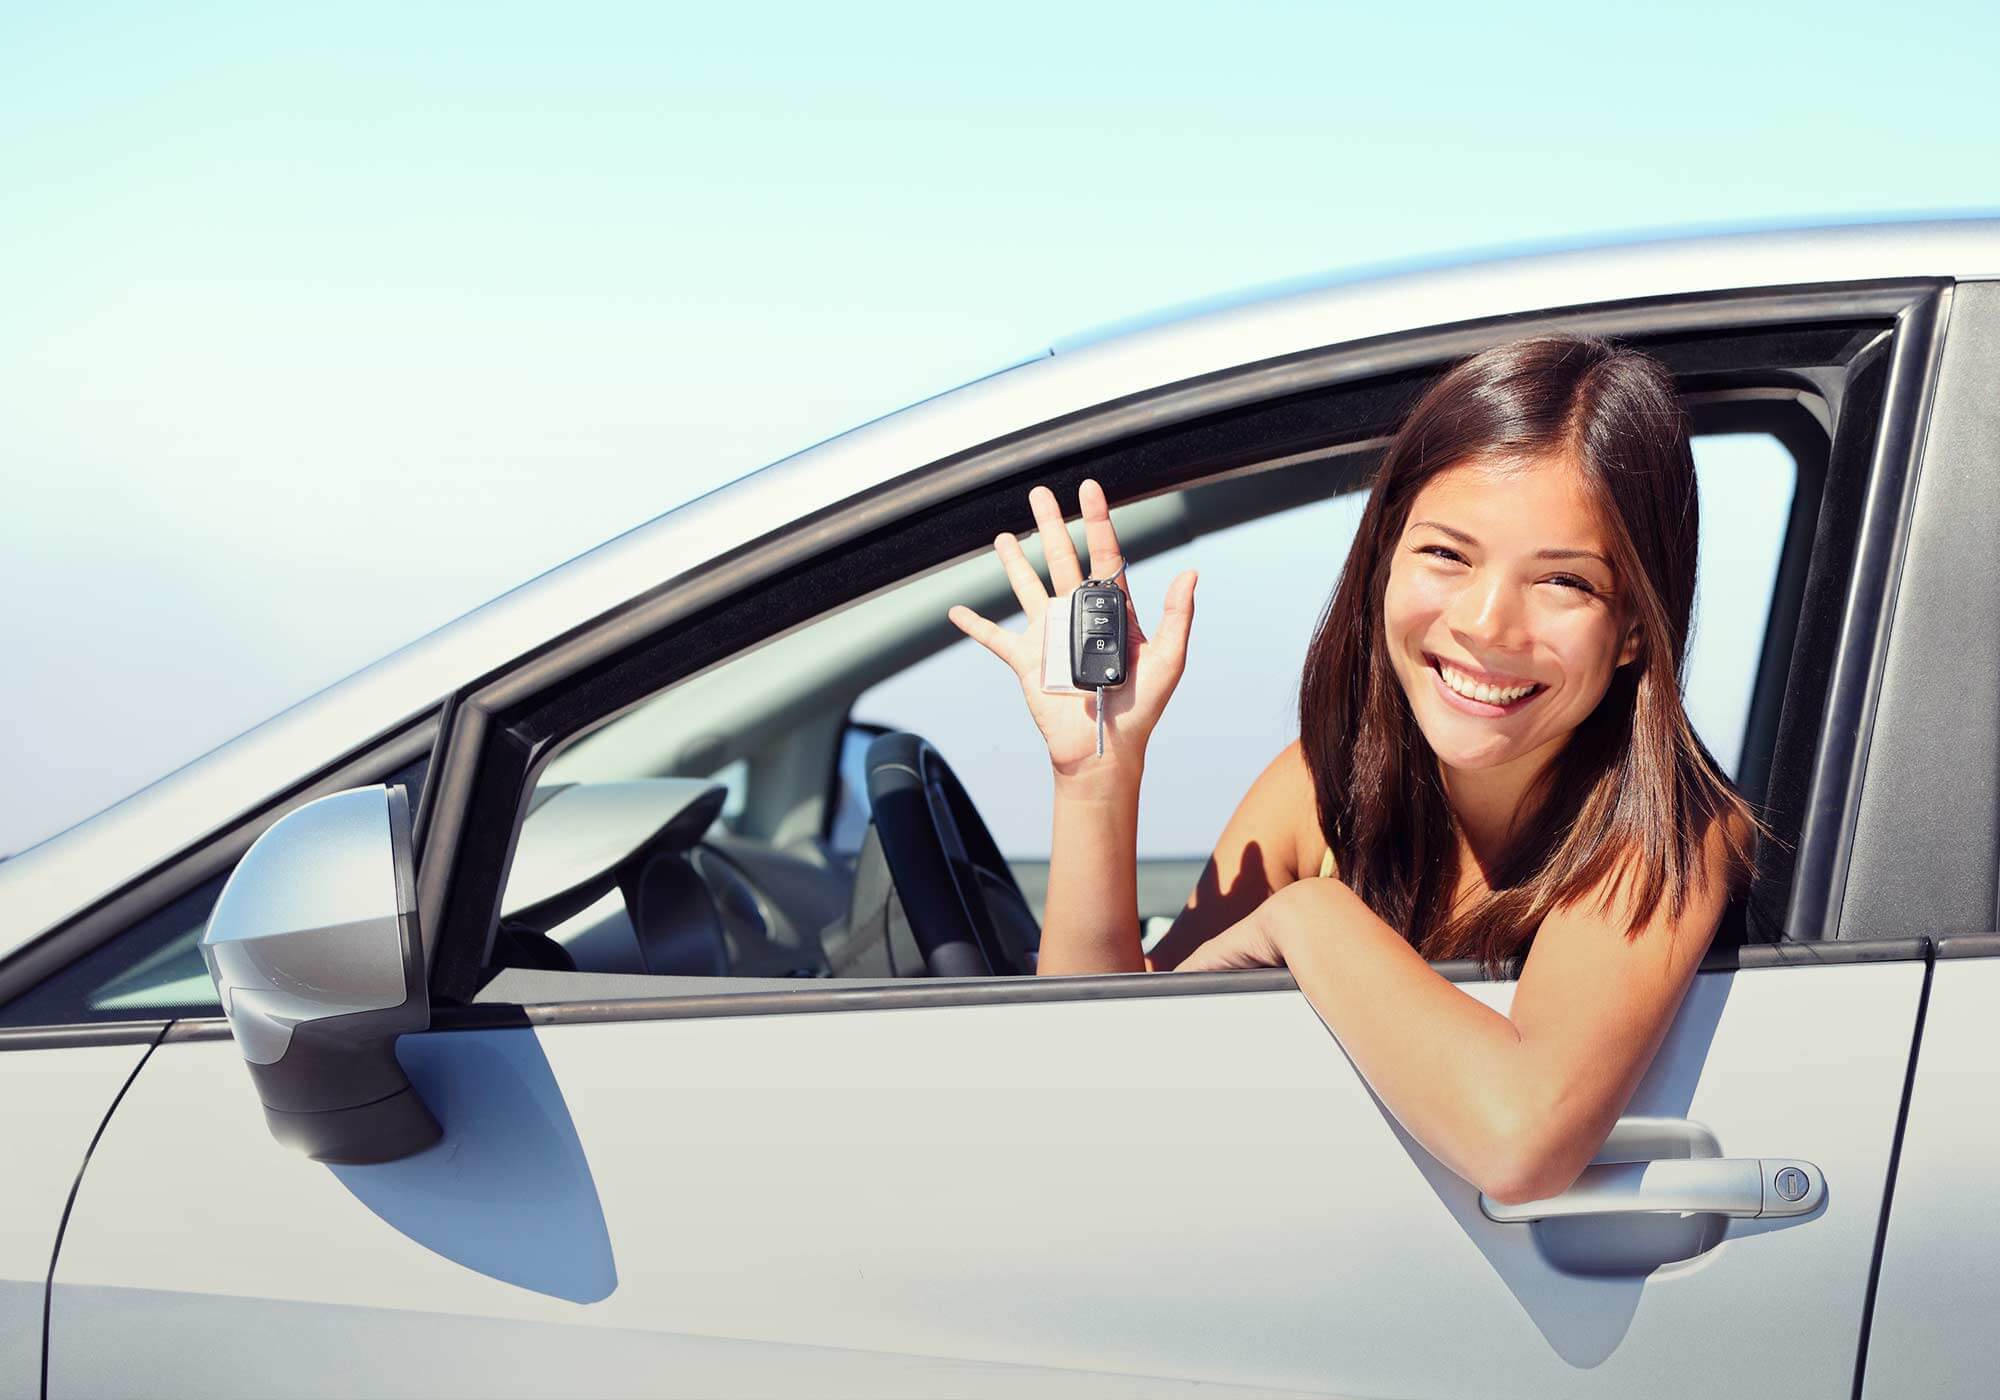 Does Automobile Insurance Follow the Car or the Driver?